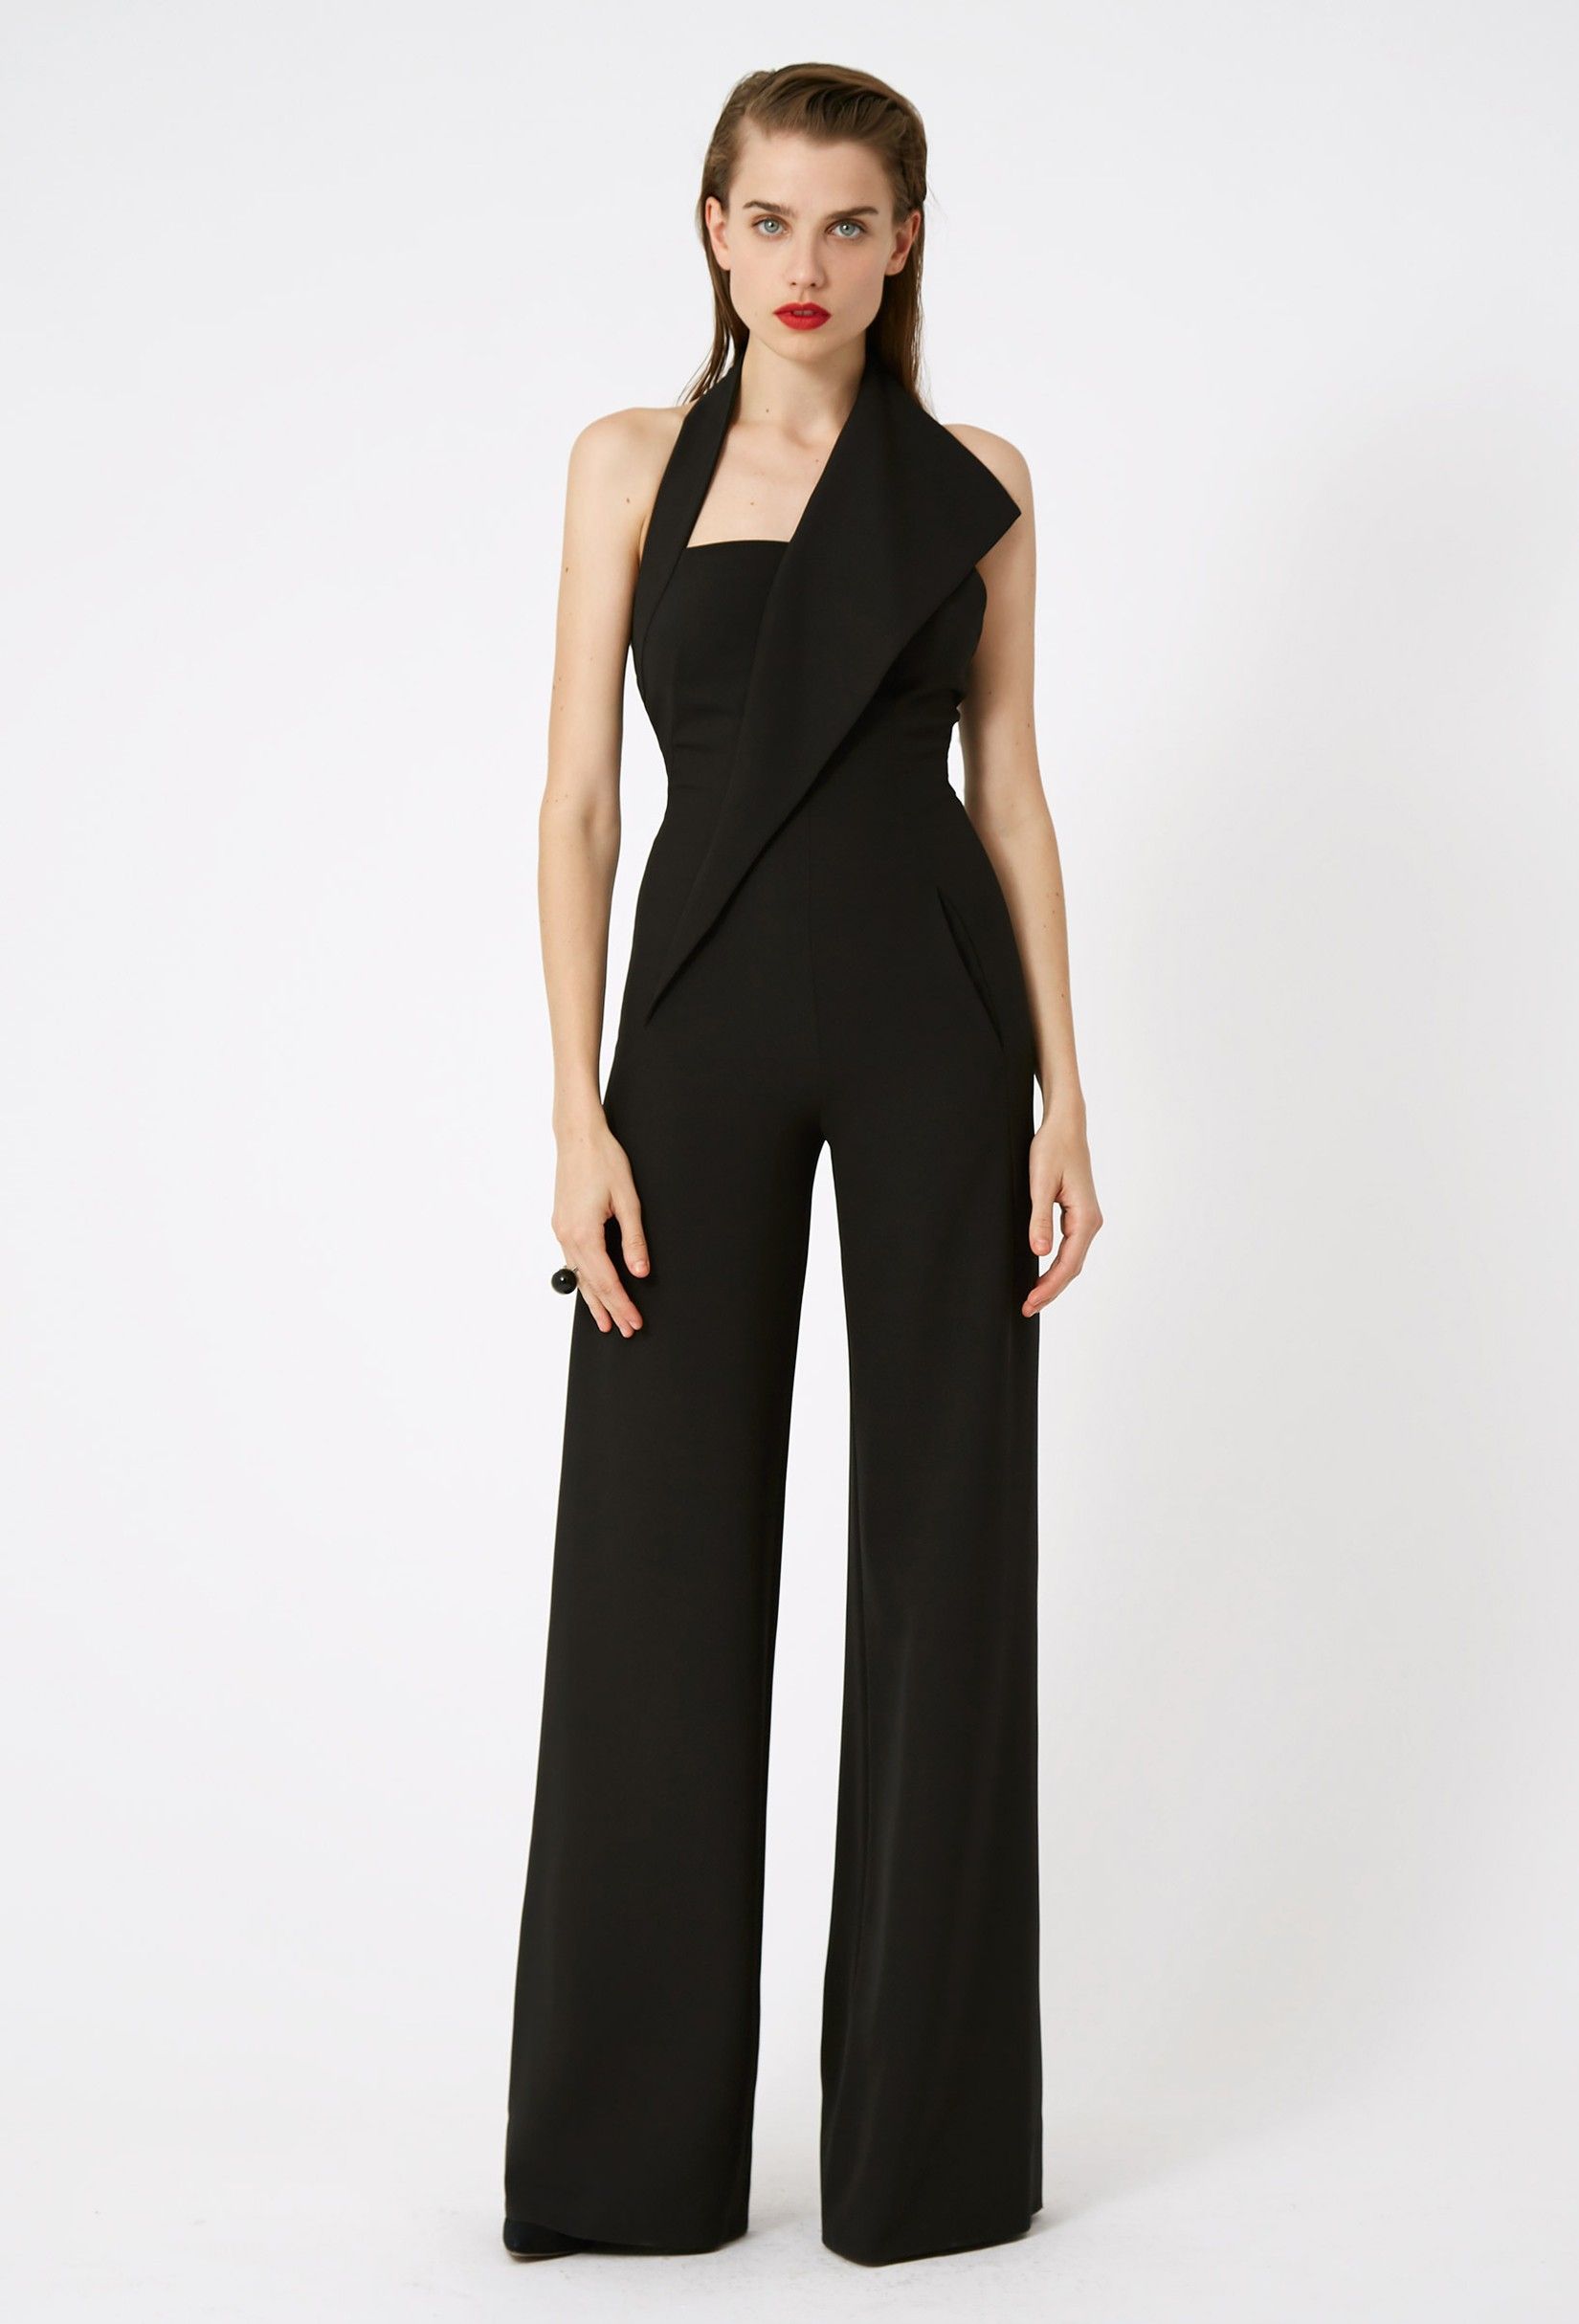 Evening Glamour: Evening Jumpsuits for Sophisticated Style